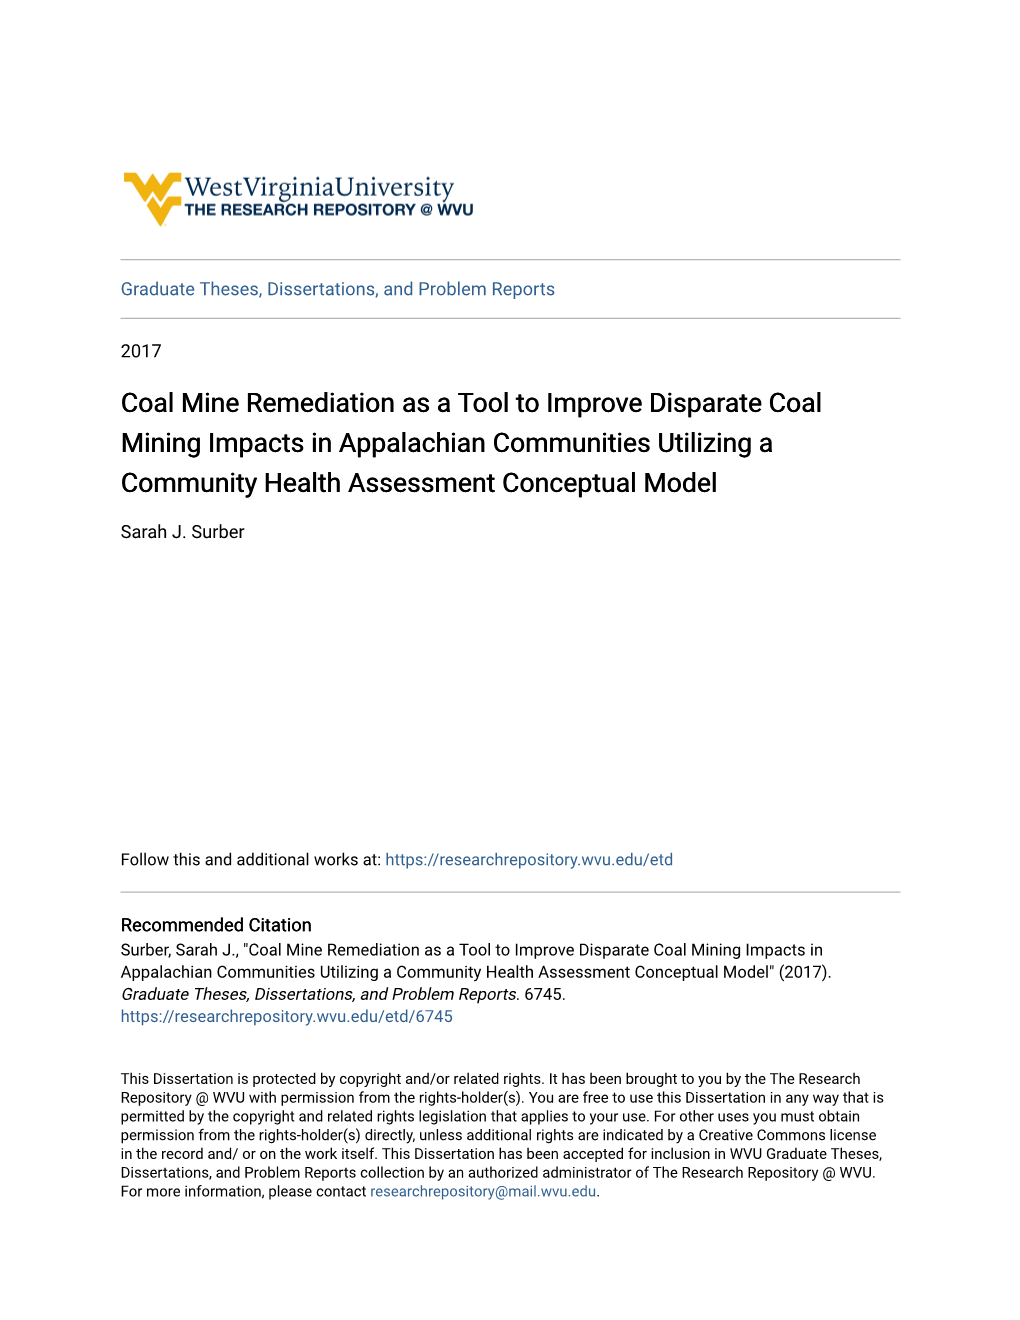 Coal Mine Remediation As a Tool to Improve Disparate Coal Mining Impacts in Appalachian Communities Utilizing a Community Health Assessment Conceptual Model